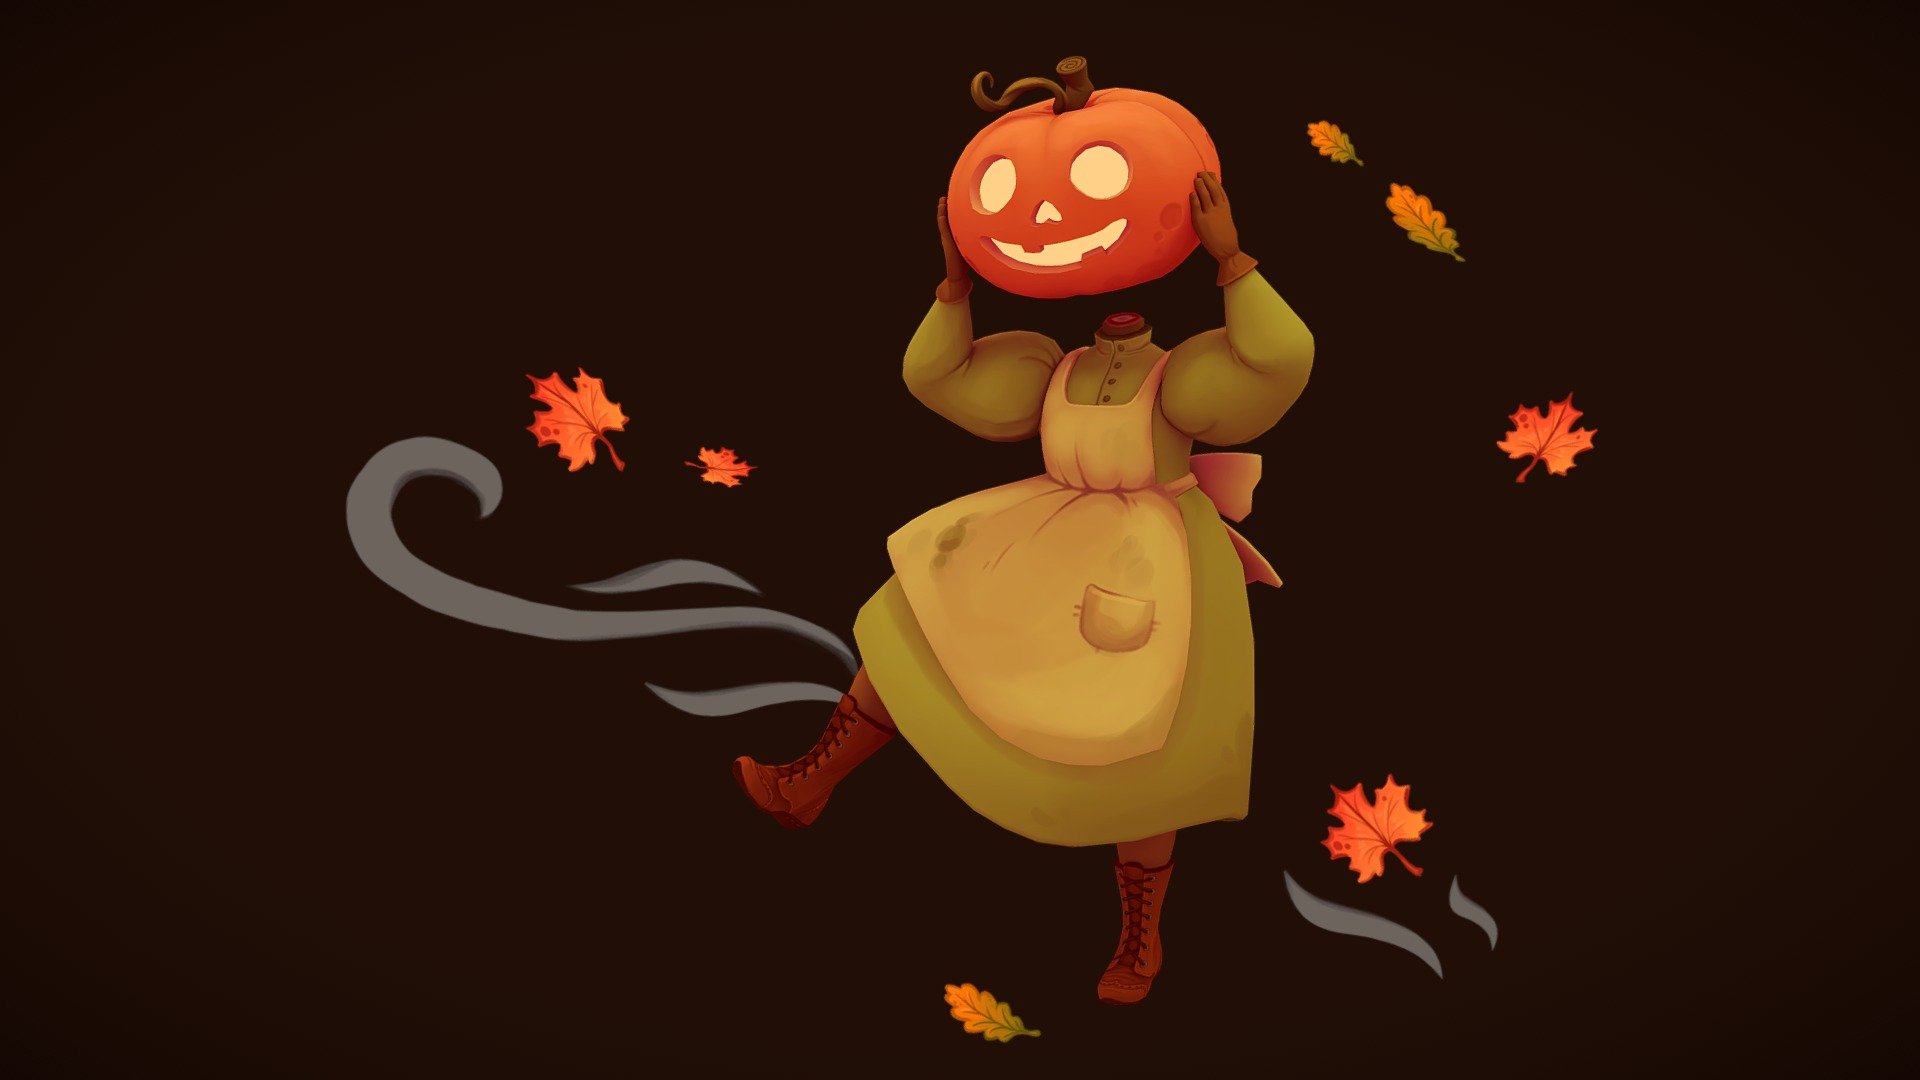 Pumpkin smile and black cat grin;
Time to let the spooky in !

Based on a drawing by Bree Paulsen.
https://twitter.com/breebird33/status/1552668195353346048 - happy pumpkin head - 3D model by alisapozzz 3d model